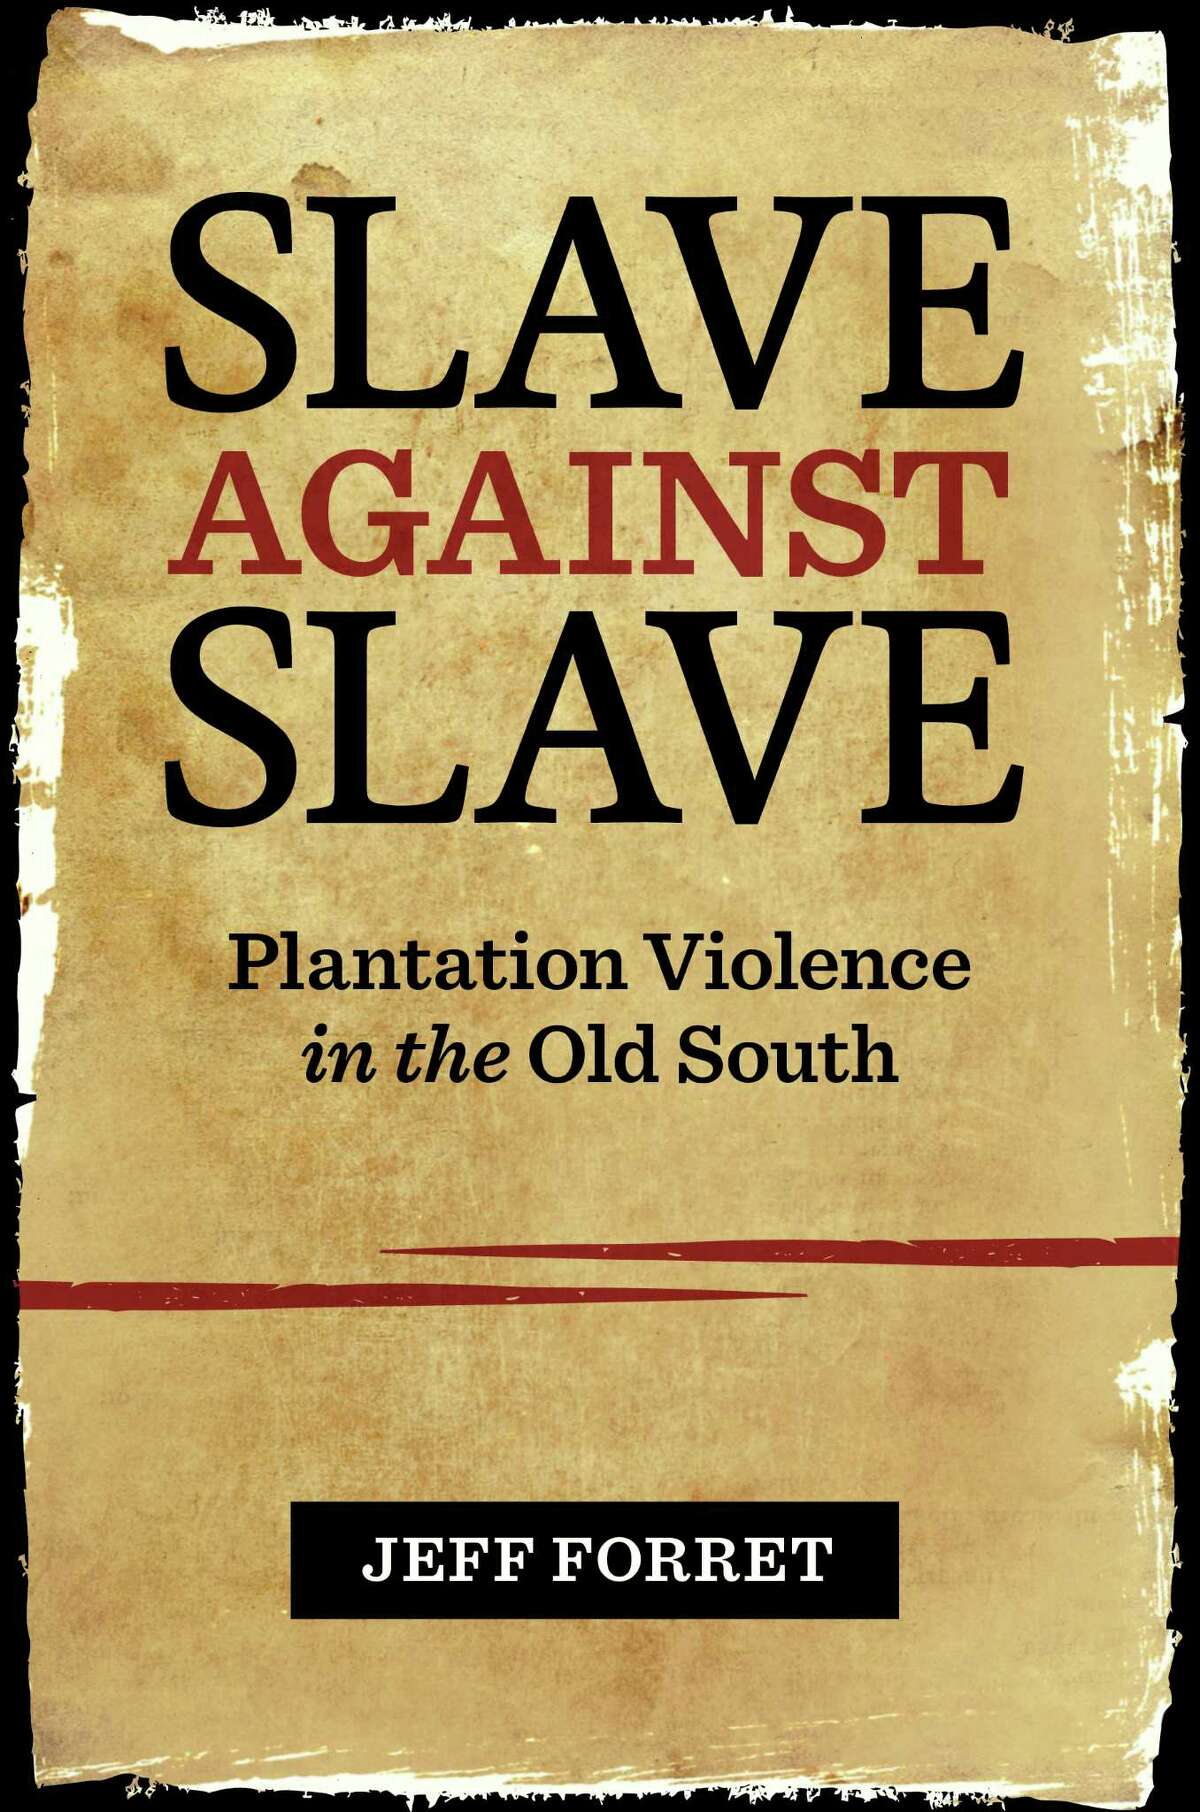 Lamar history professor Jeff Forret is a finalist for the 18th annual Frederick Douglass Book Prize, an award recognizing the best book on slavery, resistance or abolition.Â His book, ?Slave Against Slave: Plantation Violence in the Old South and New Directions in Slavery Studies,? challenges ideas of pre-Civil War slave communities in the U.S. South as uniformly harmonious.